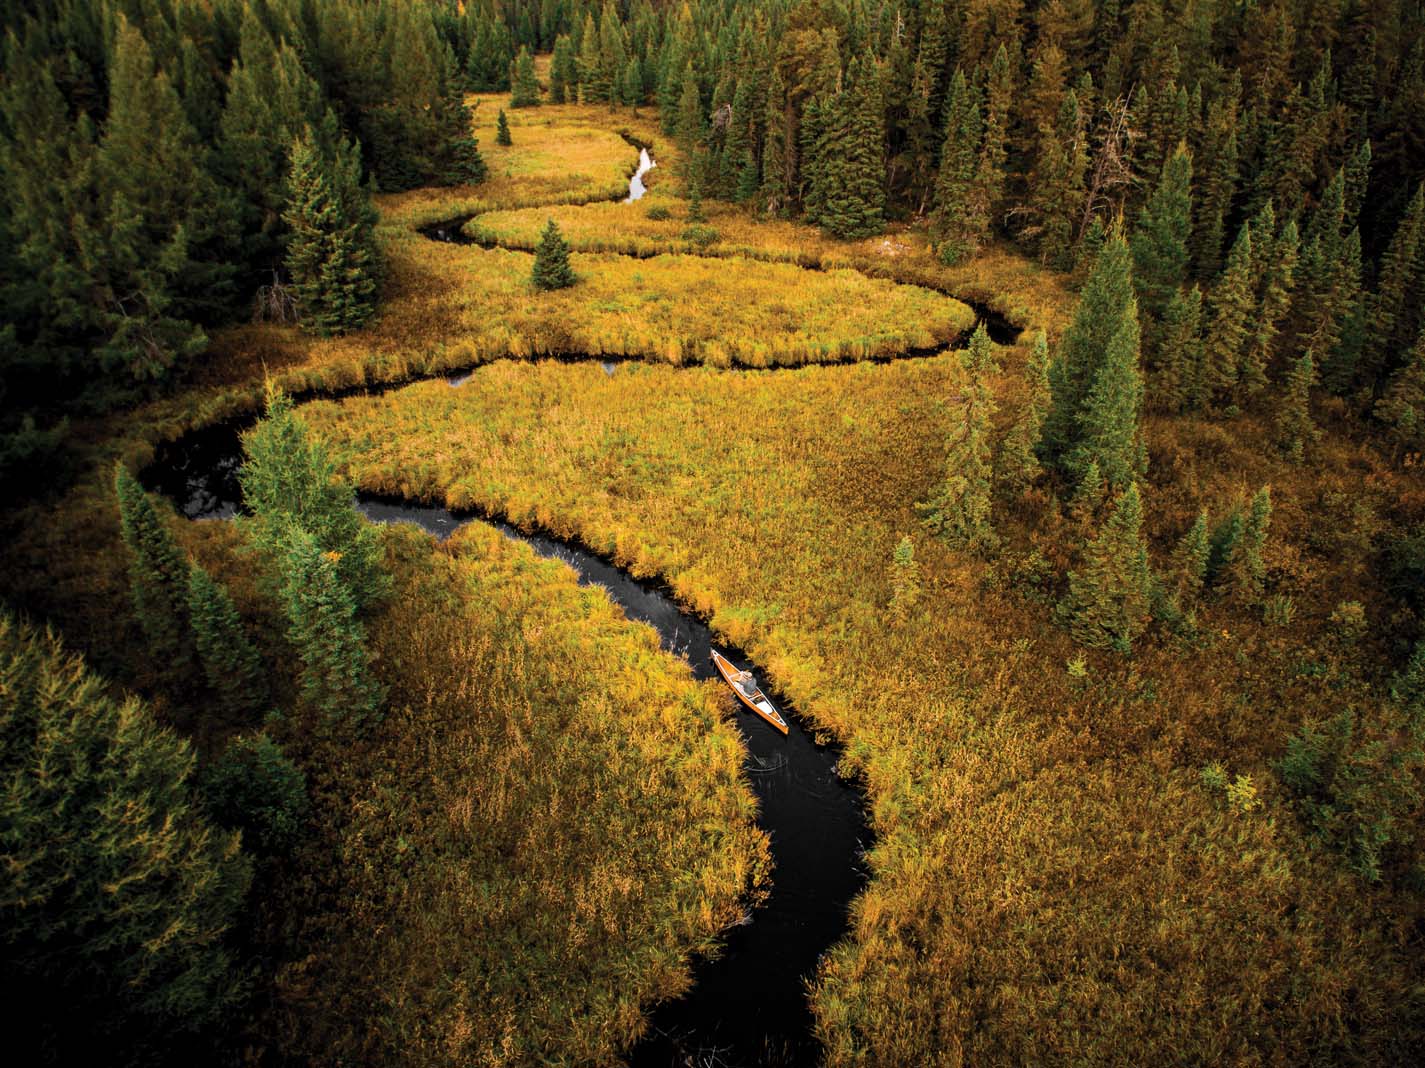 Snake River, near Bald Eagle Lake, is an unforgettable stretch of Boundary Waters Canoe Area Wilderness